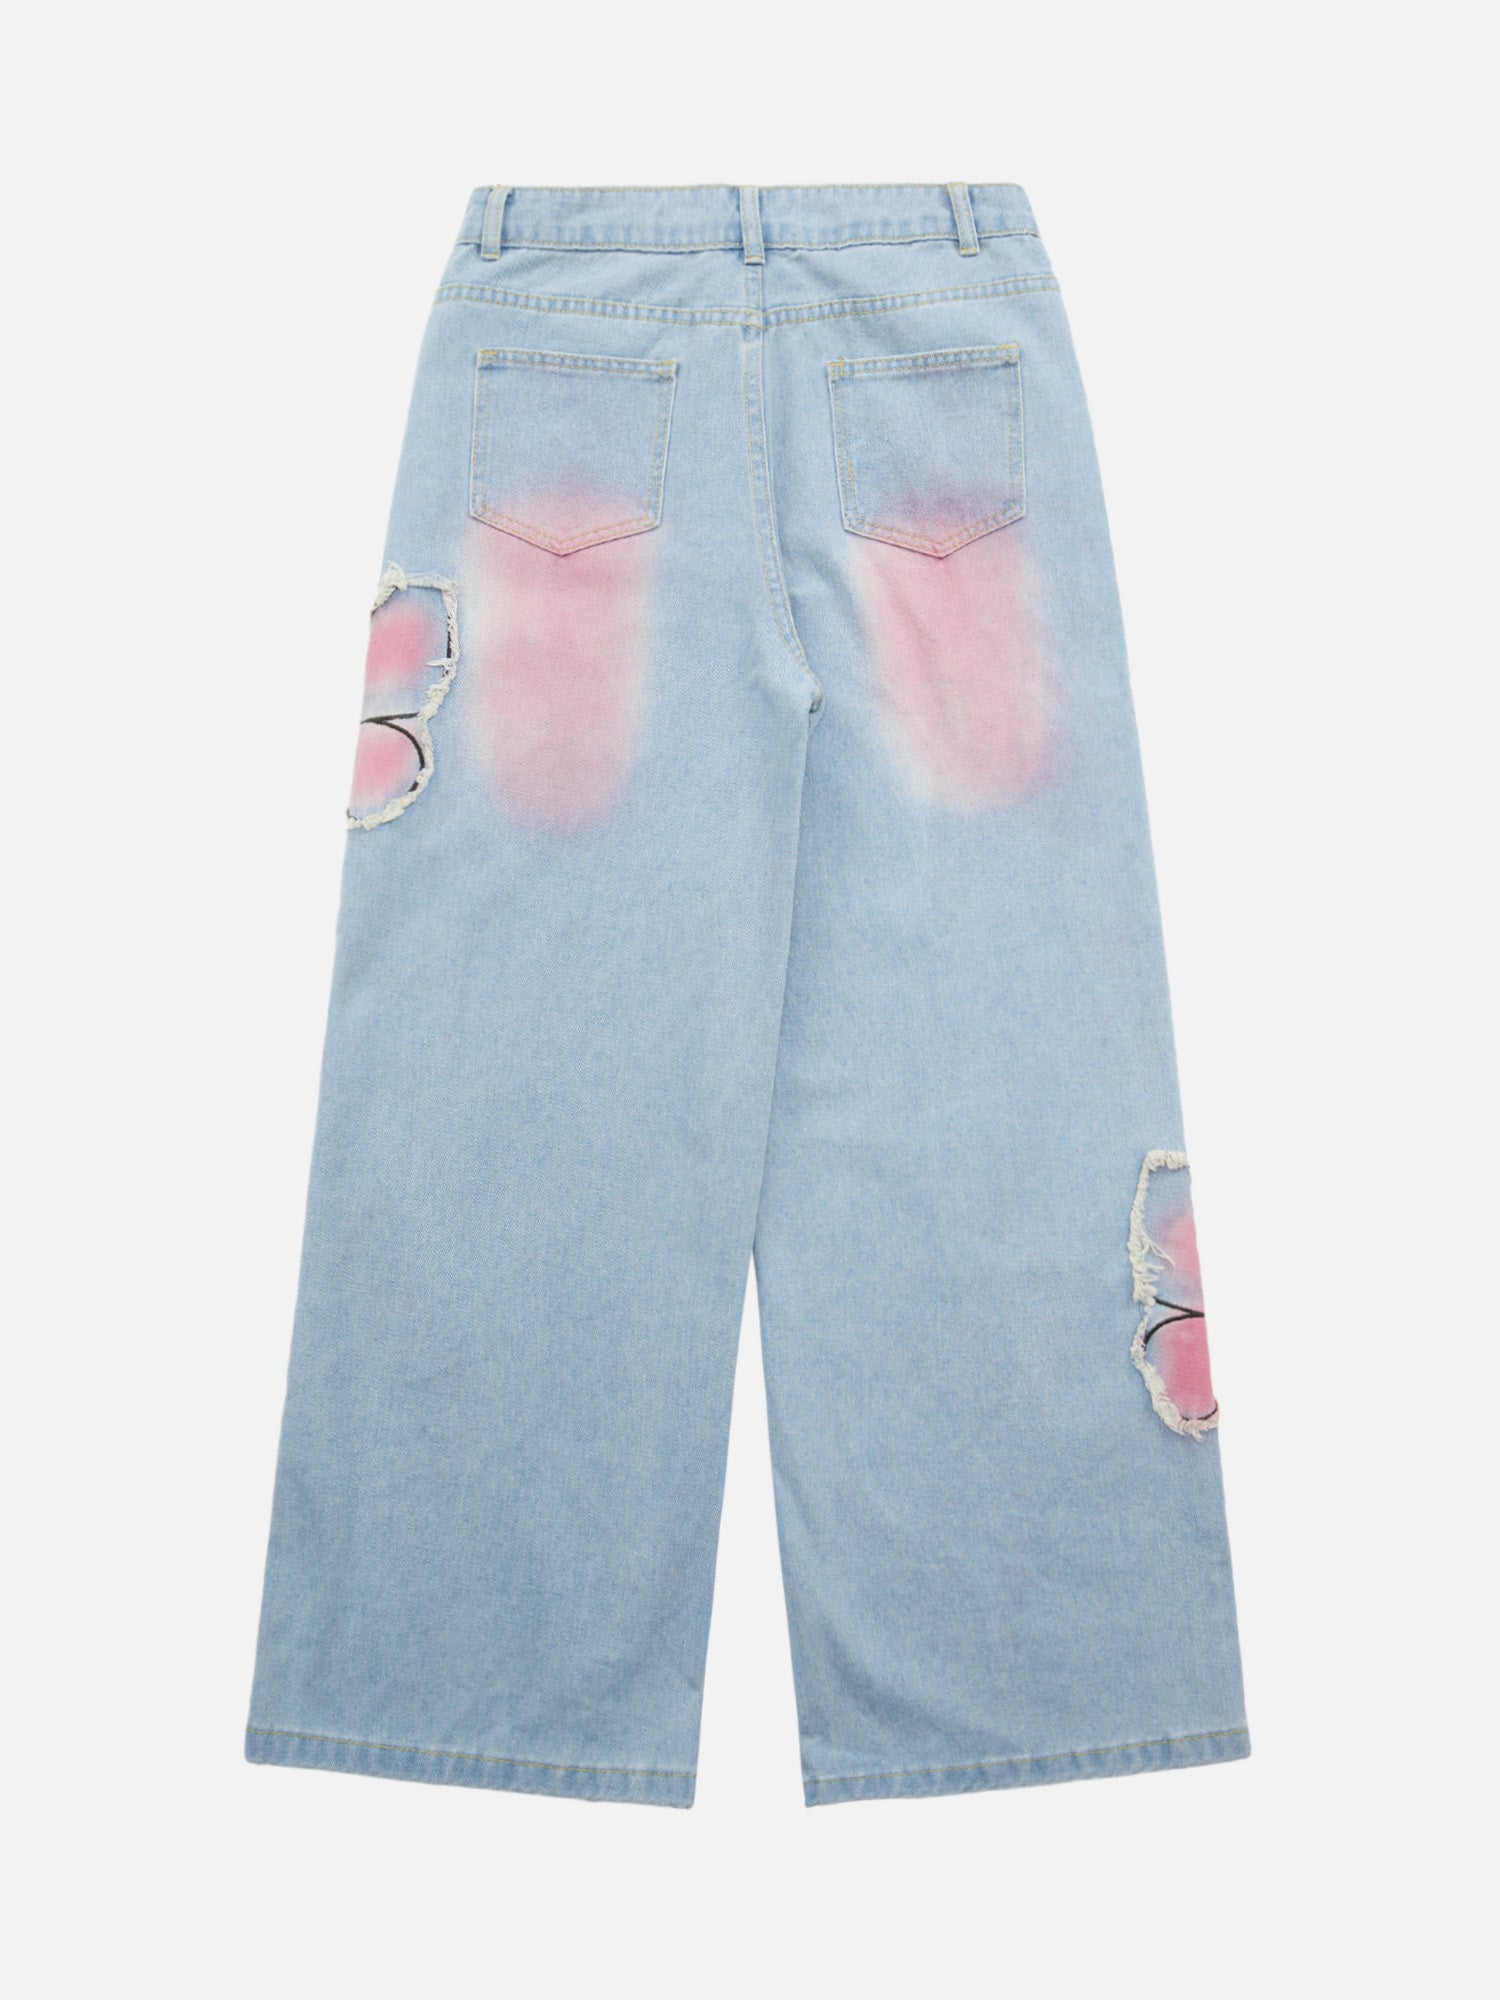 Thesupermade Tie-dye Butterfly Embroidered Raw Edge Jeans